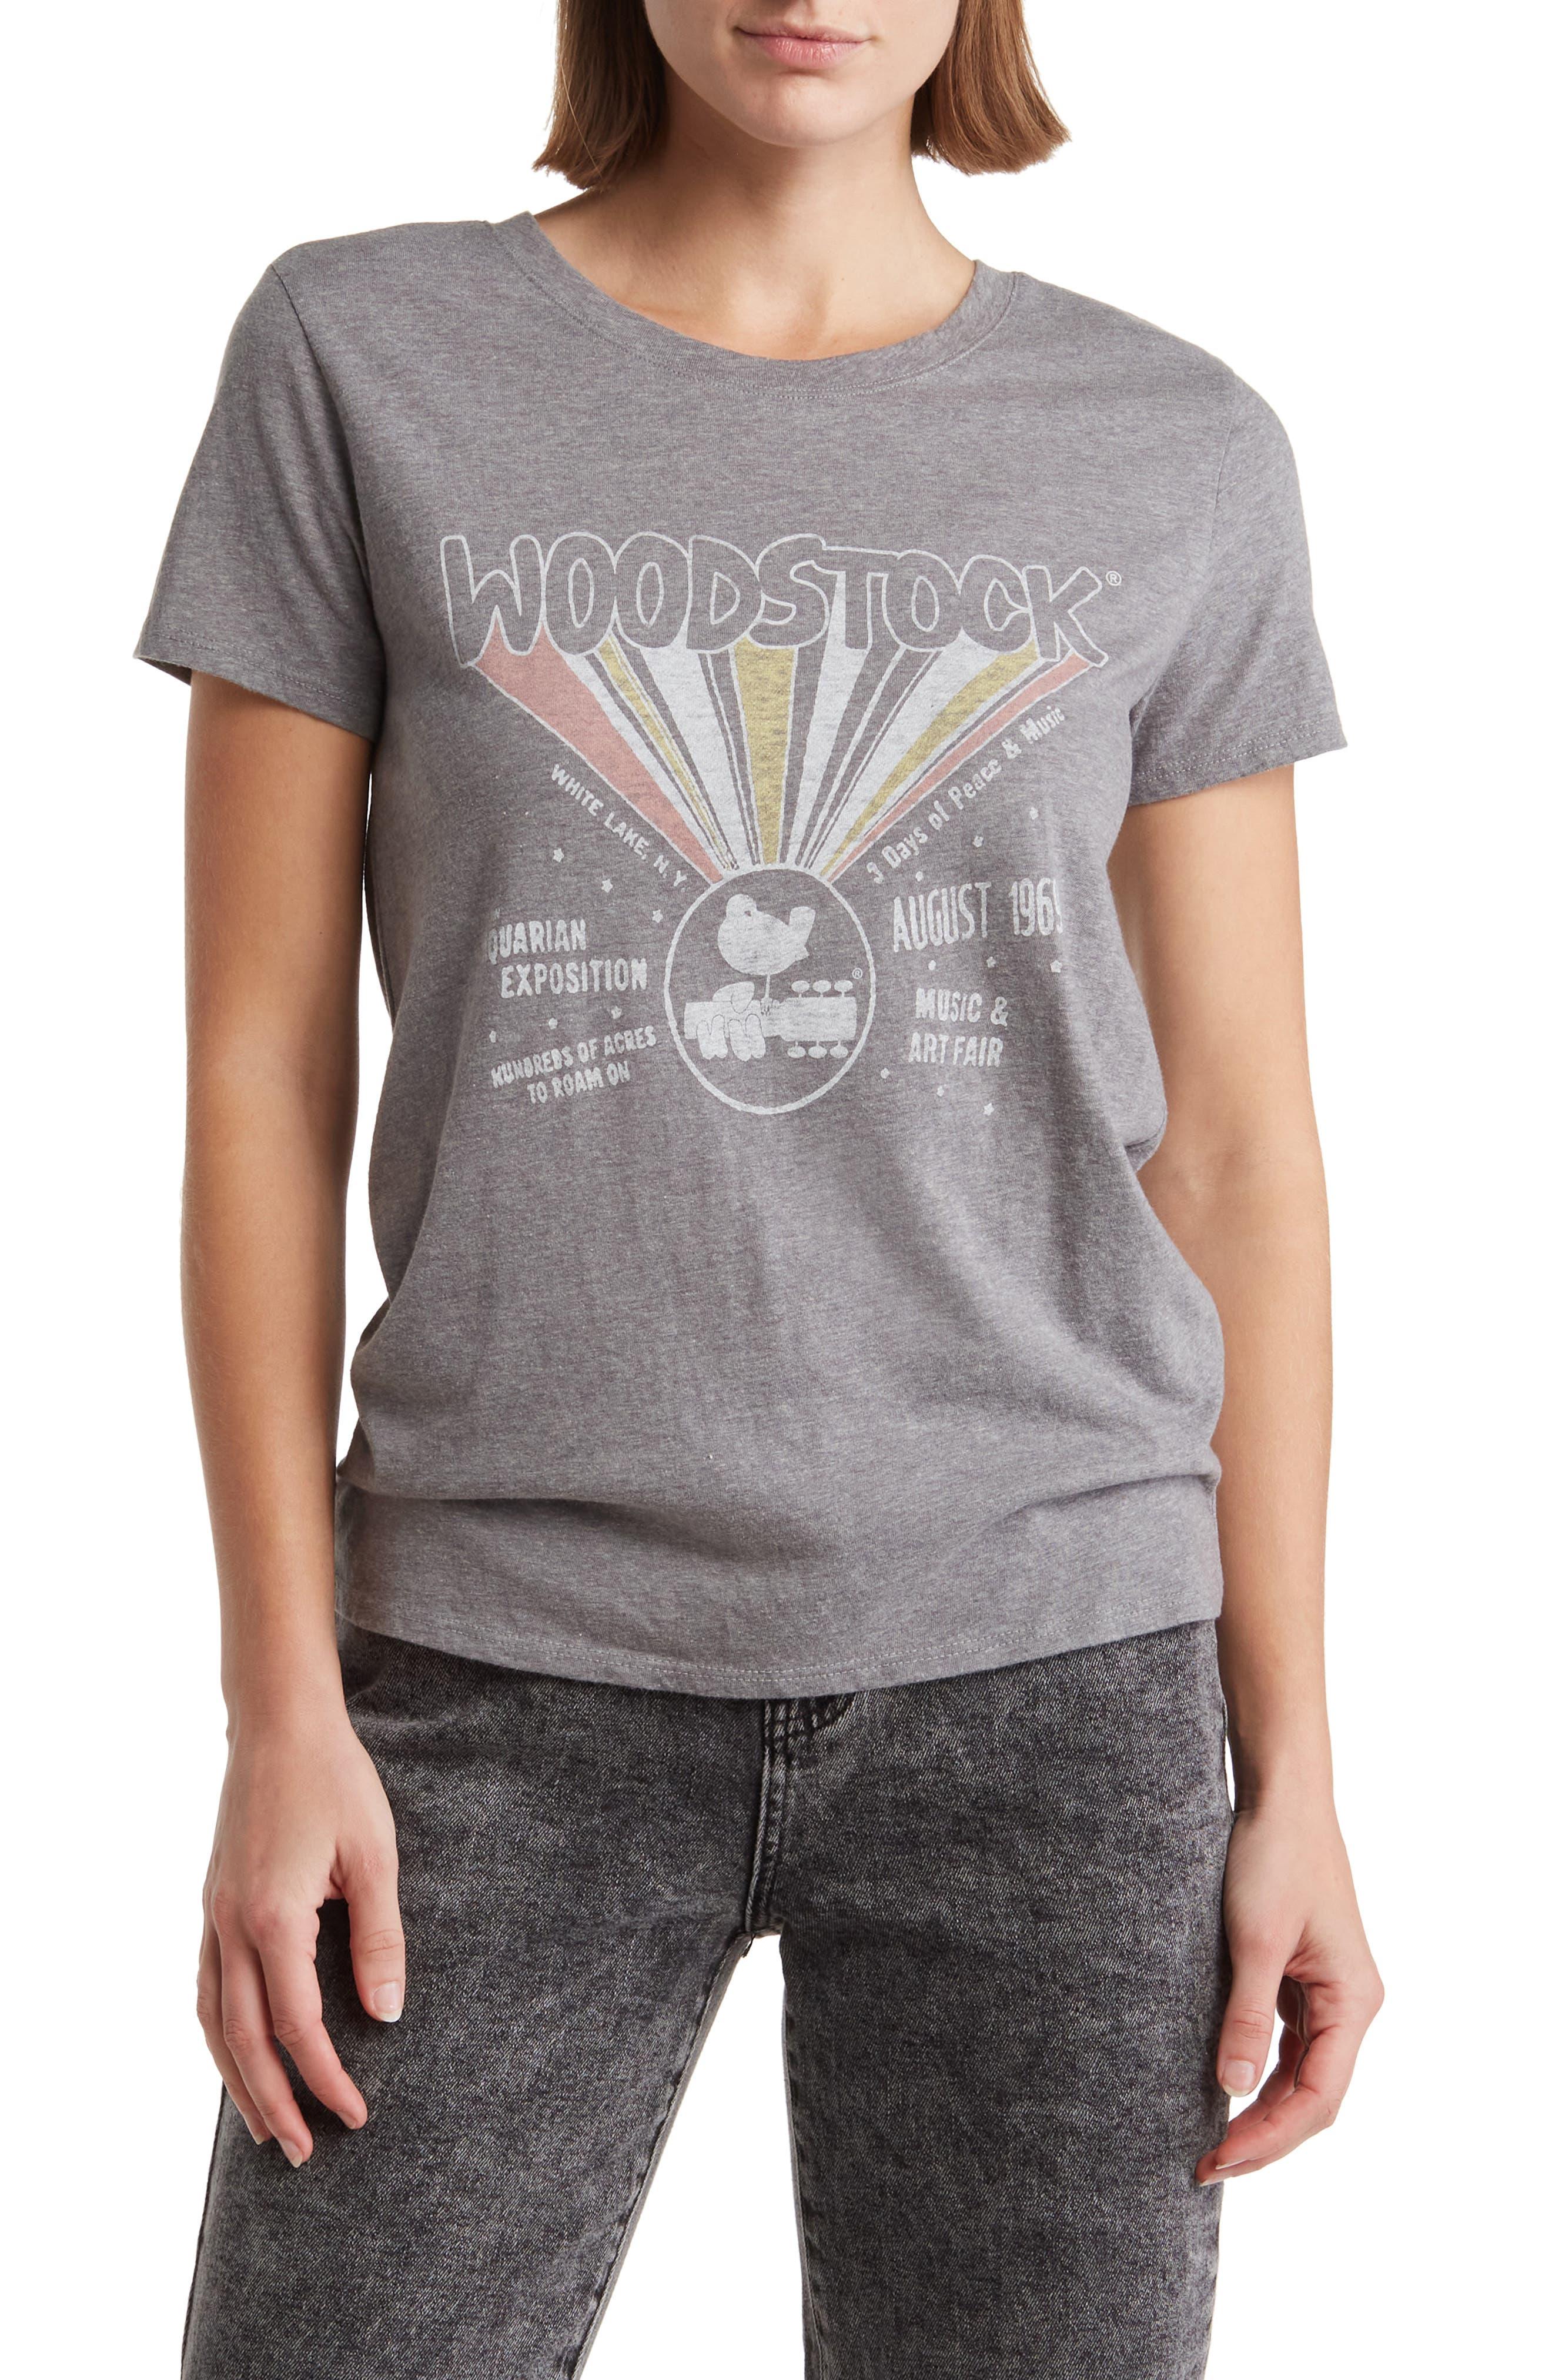 Lucky Brand Woodstock Classic Crewneck Graphic T-shirt in Gray